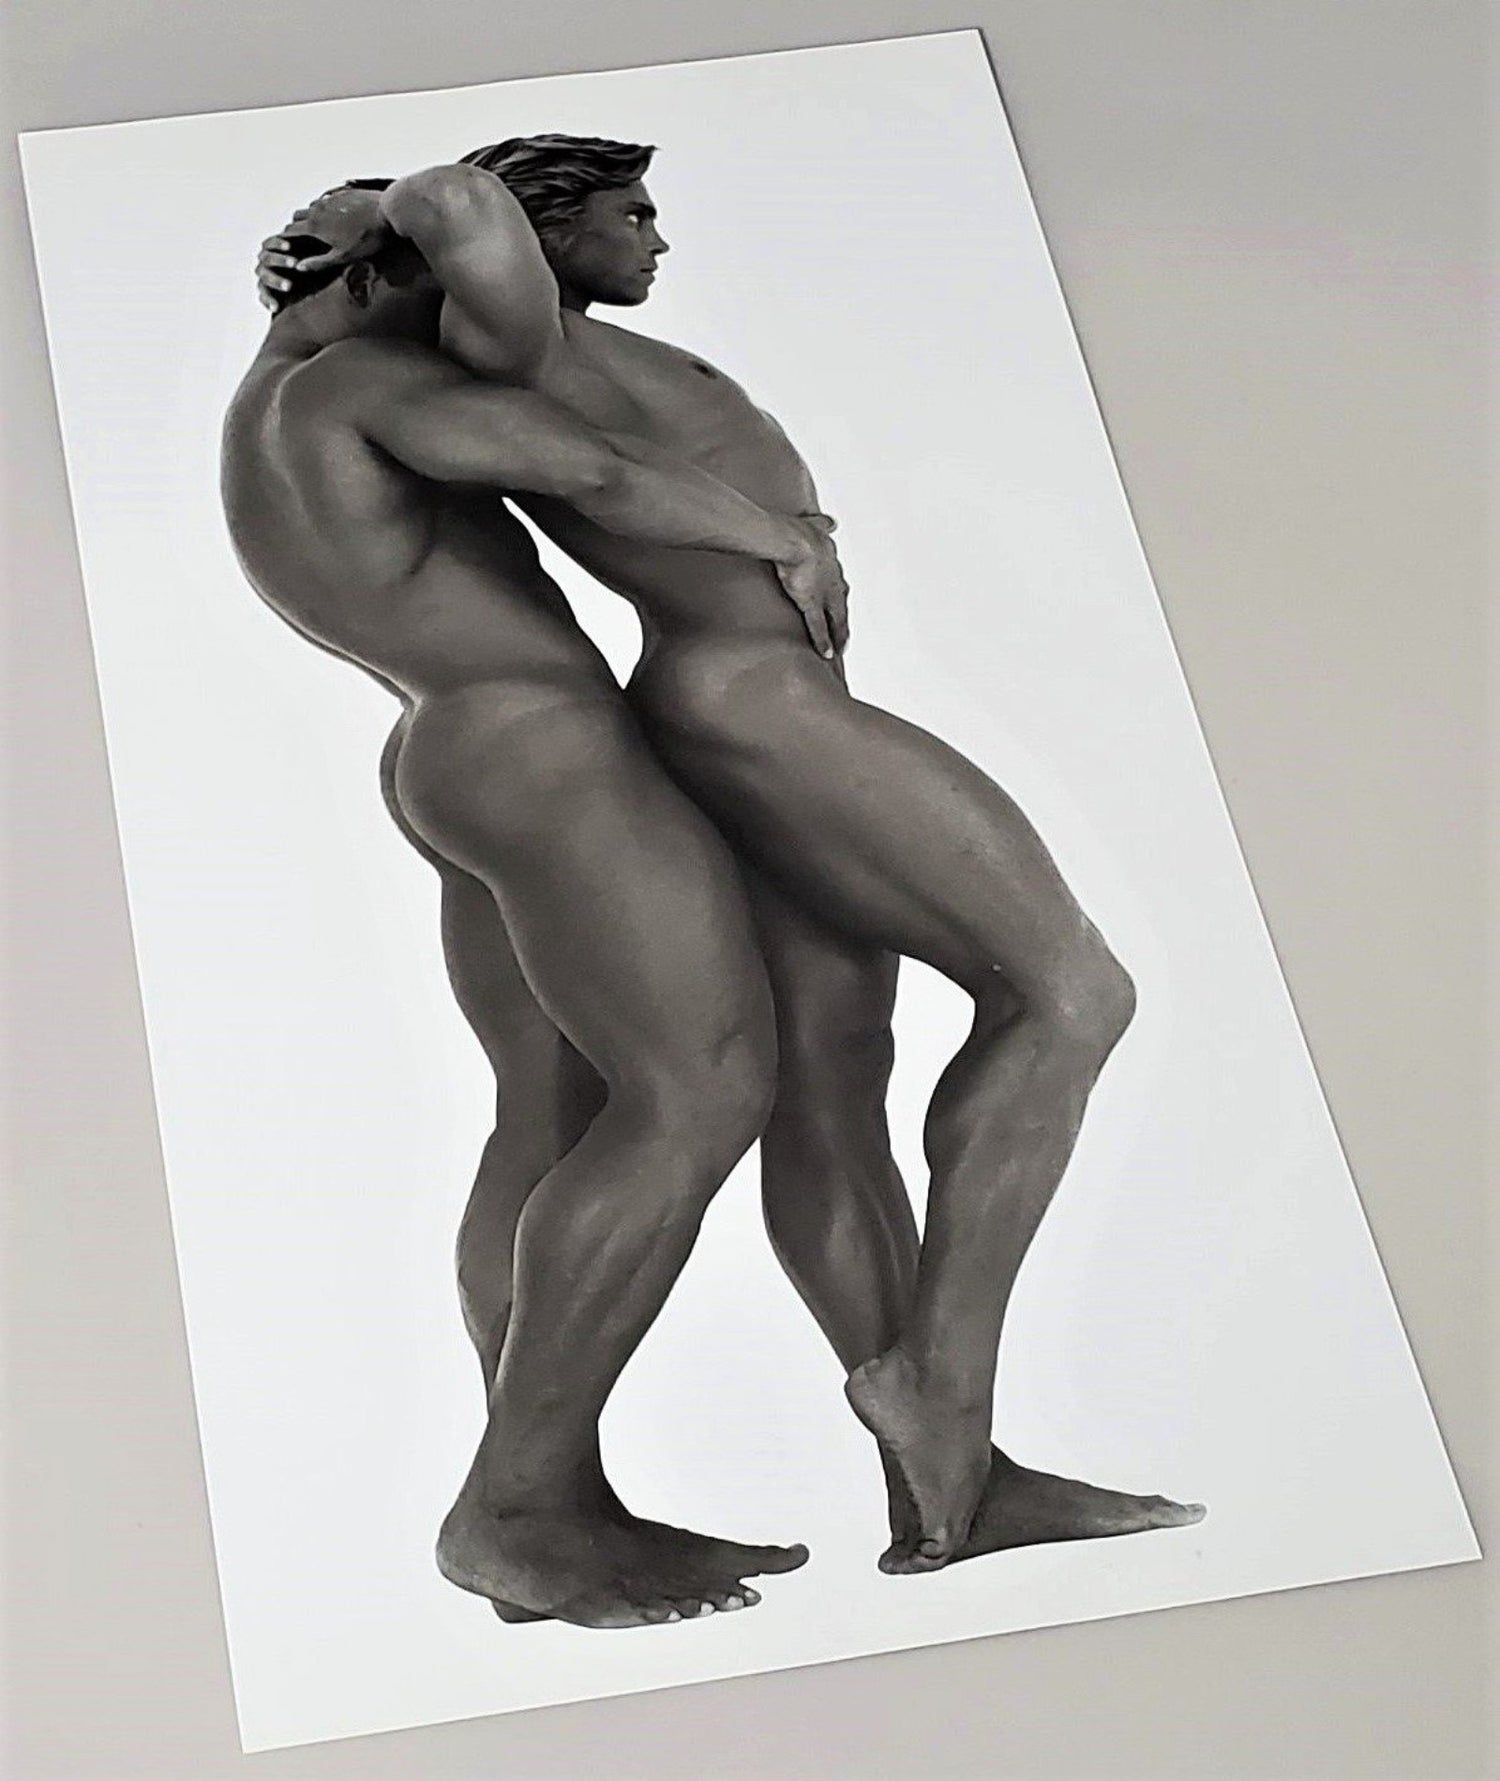 Authentic Herb Ritts Nude Men Standing Photo Duo Available In AREA51GALLERY